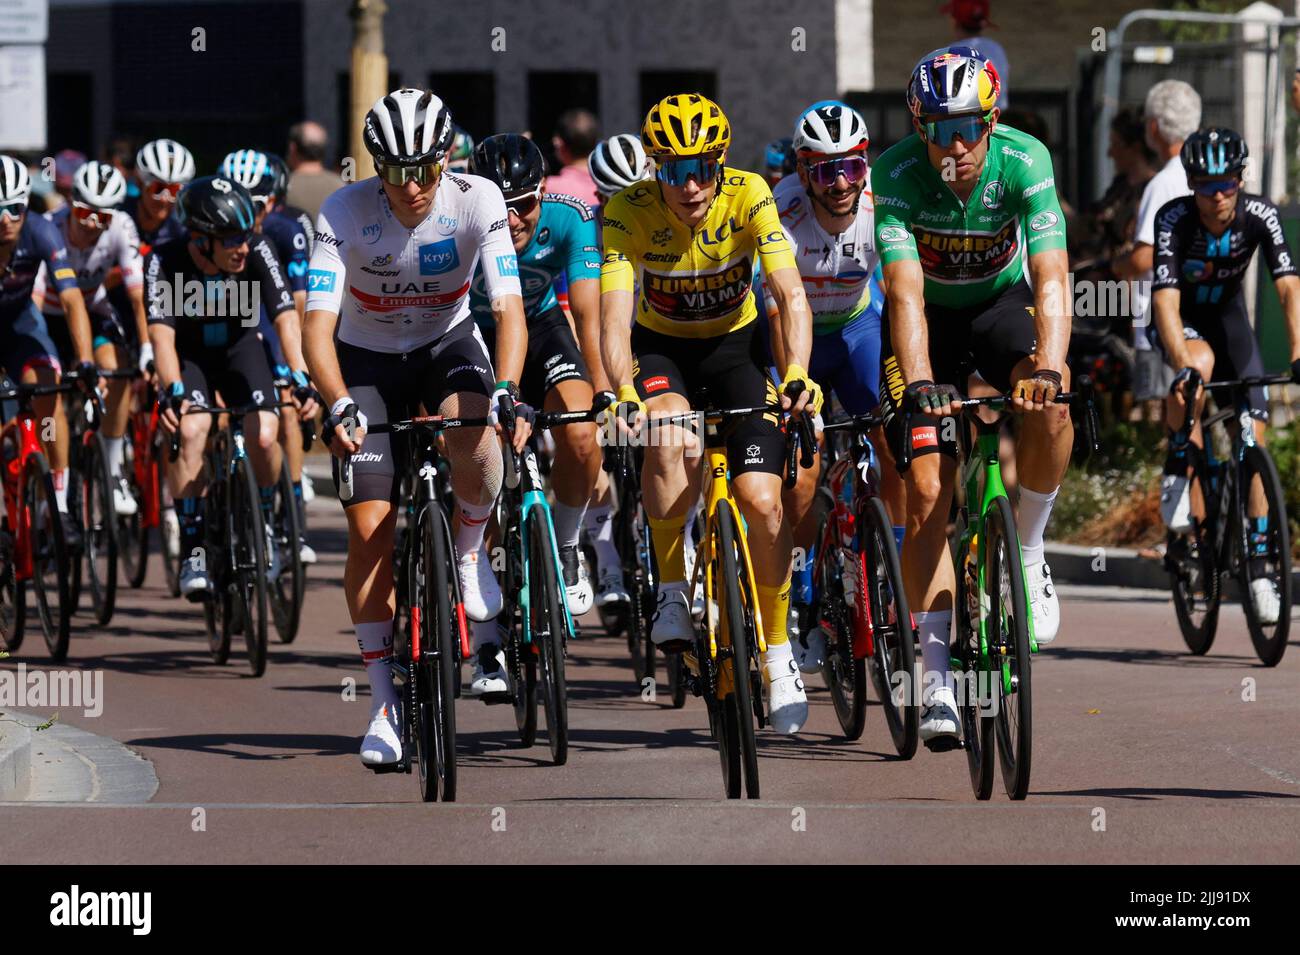 Cycling - Tour de France - Stage 21 - Paris La Defense Arena to Champs-Elysees - France - July 24, 2022 UAE Team Emirates' Tadej Pogacar, Jumbo - Visma's Jonas Vingegaard and Jumbo - Visma's Wout Van Aert in action with riders during stage 21 REUTERS/Gonzalo Fuentes Stock Photo